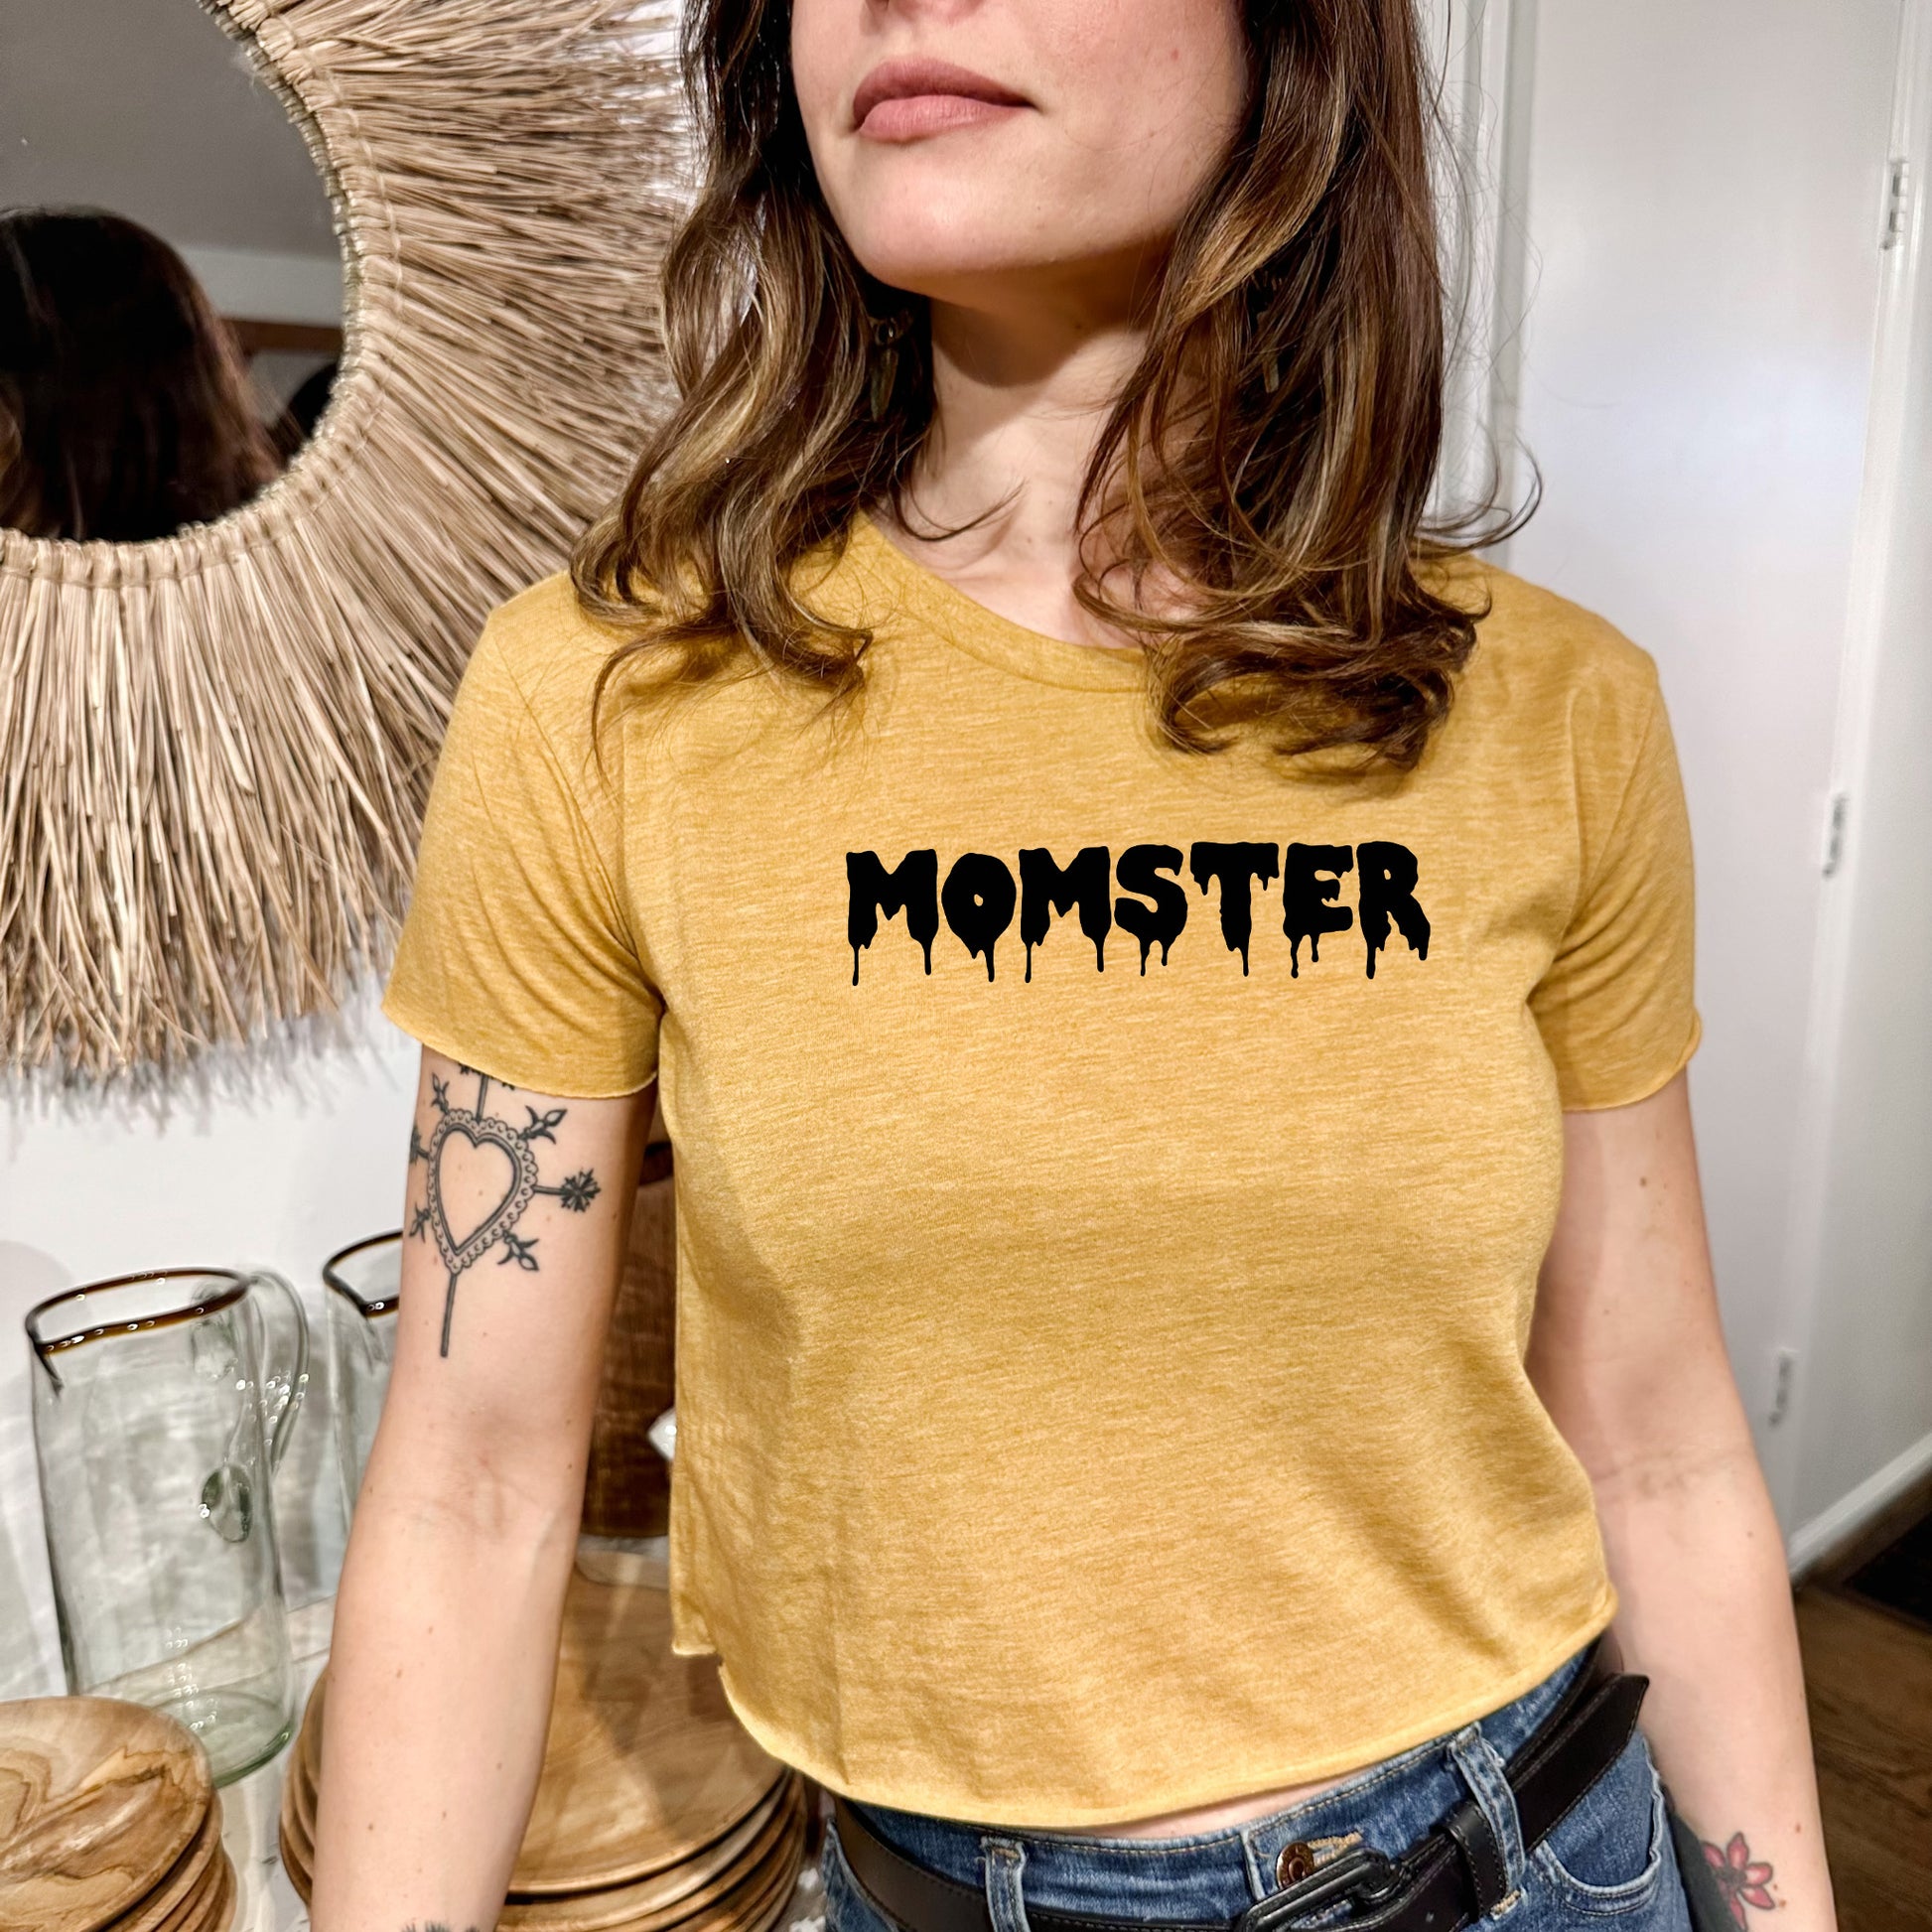 a woman wearing a yellow shirt with the word monster on it